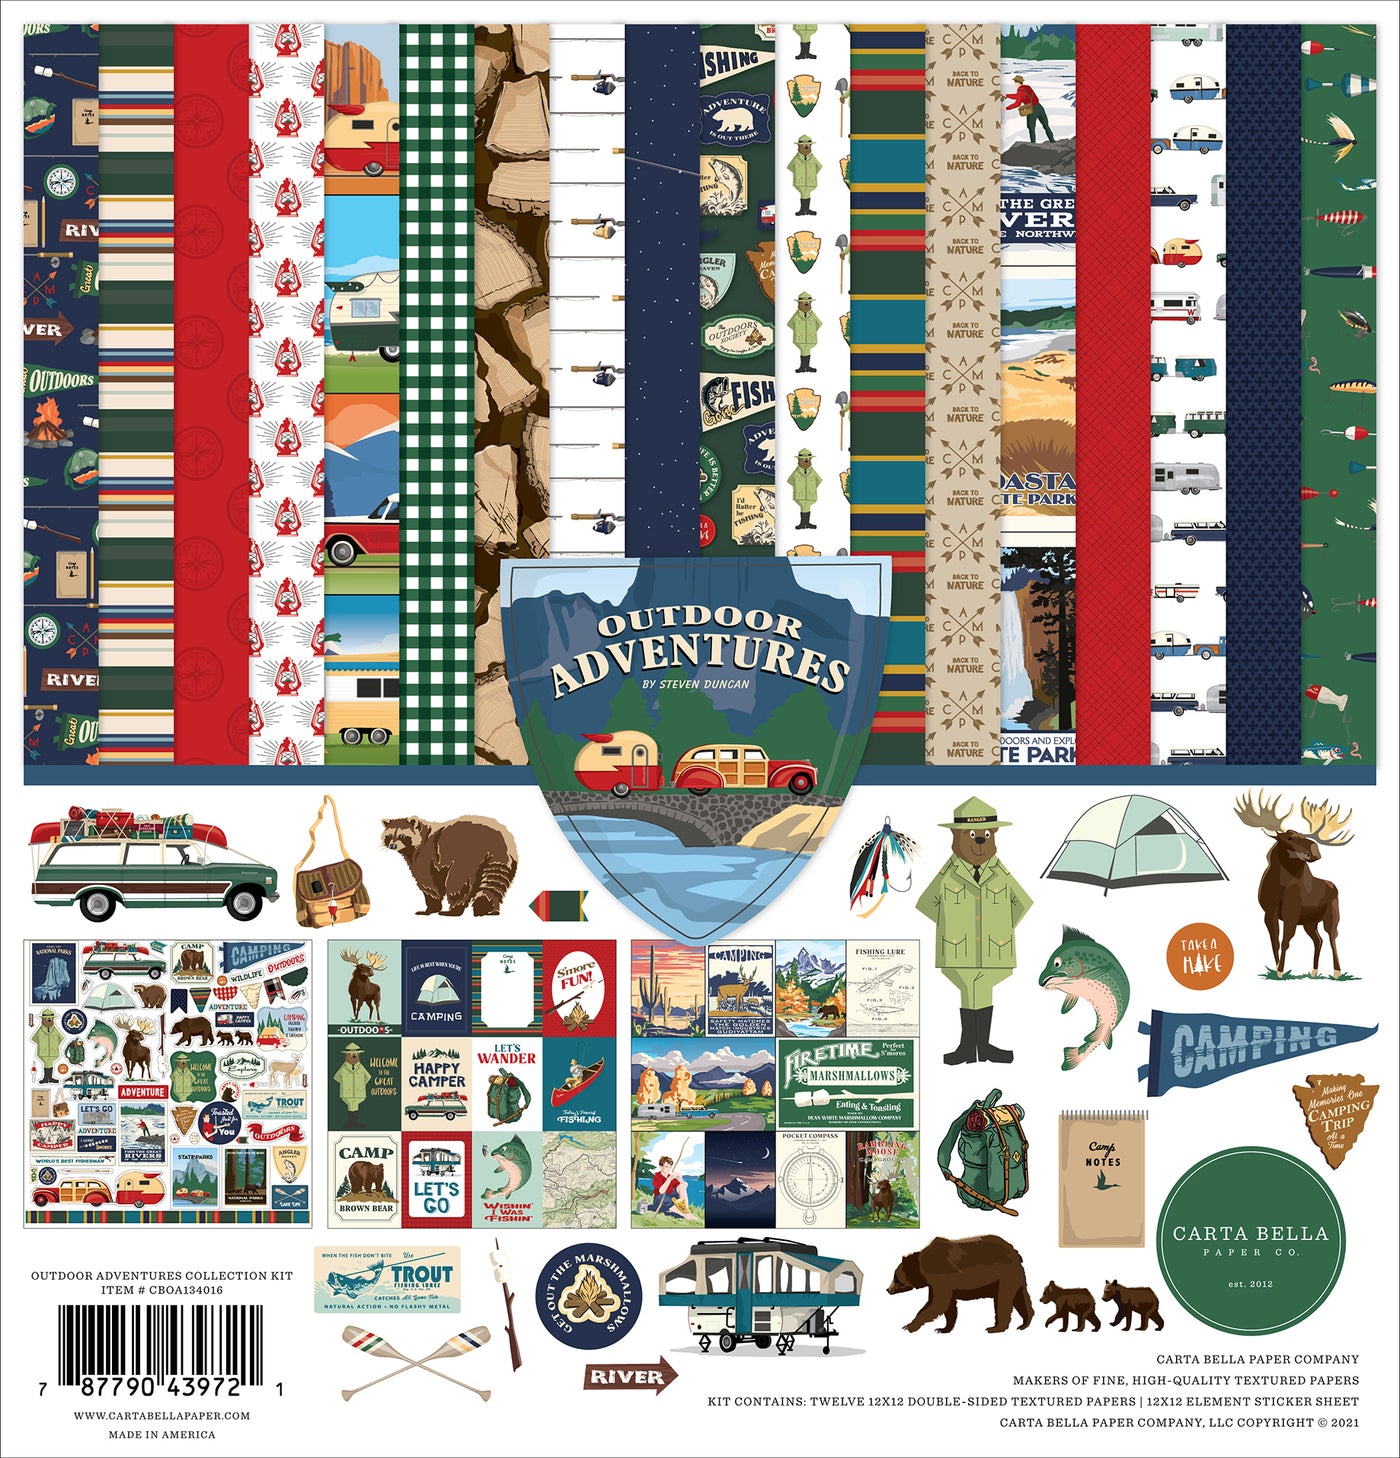 Twelve double-sided papers with camping and outdoor exploring themes. 12x12 inch textured cardstock; includes an element sticker sheet.